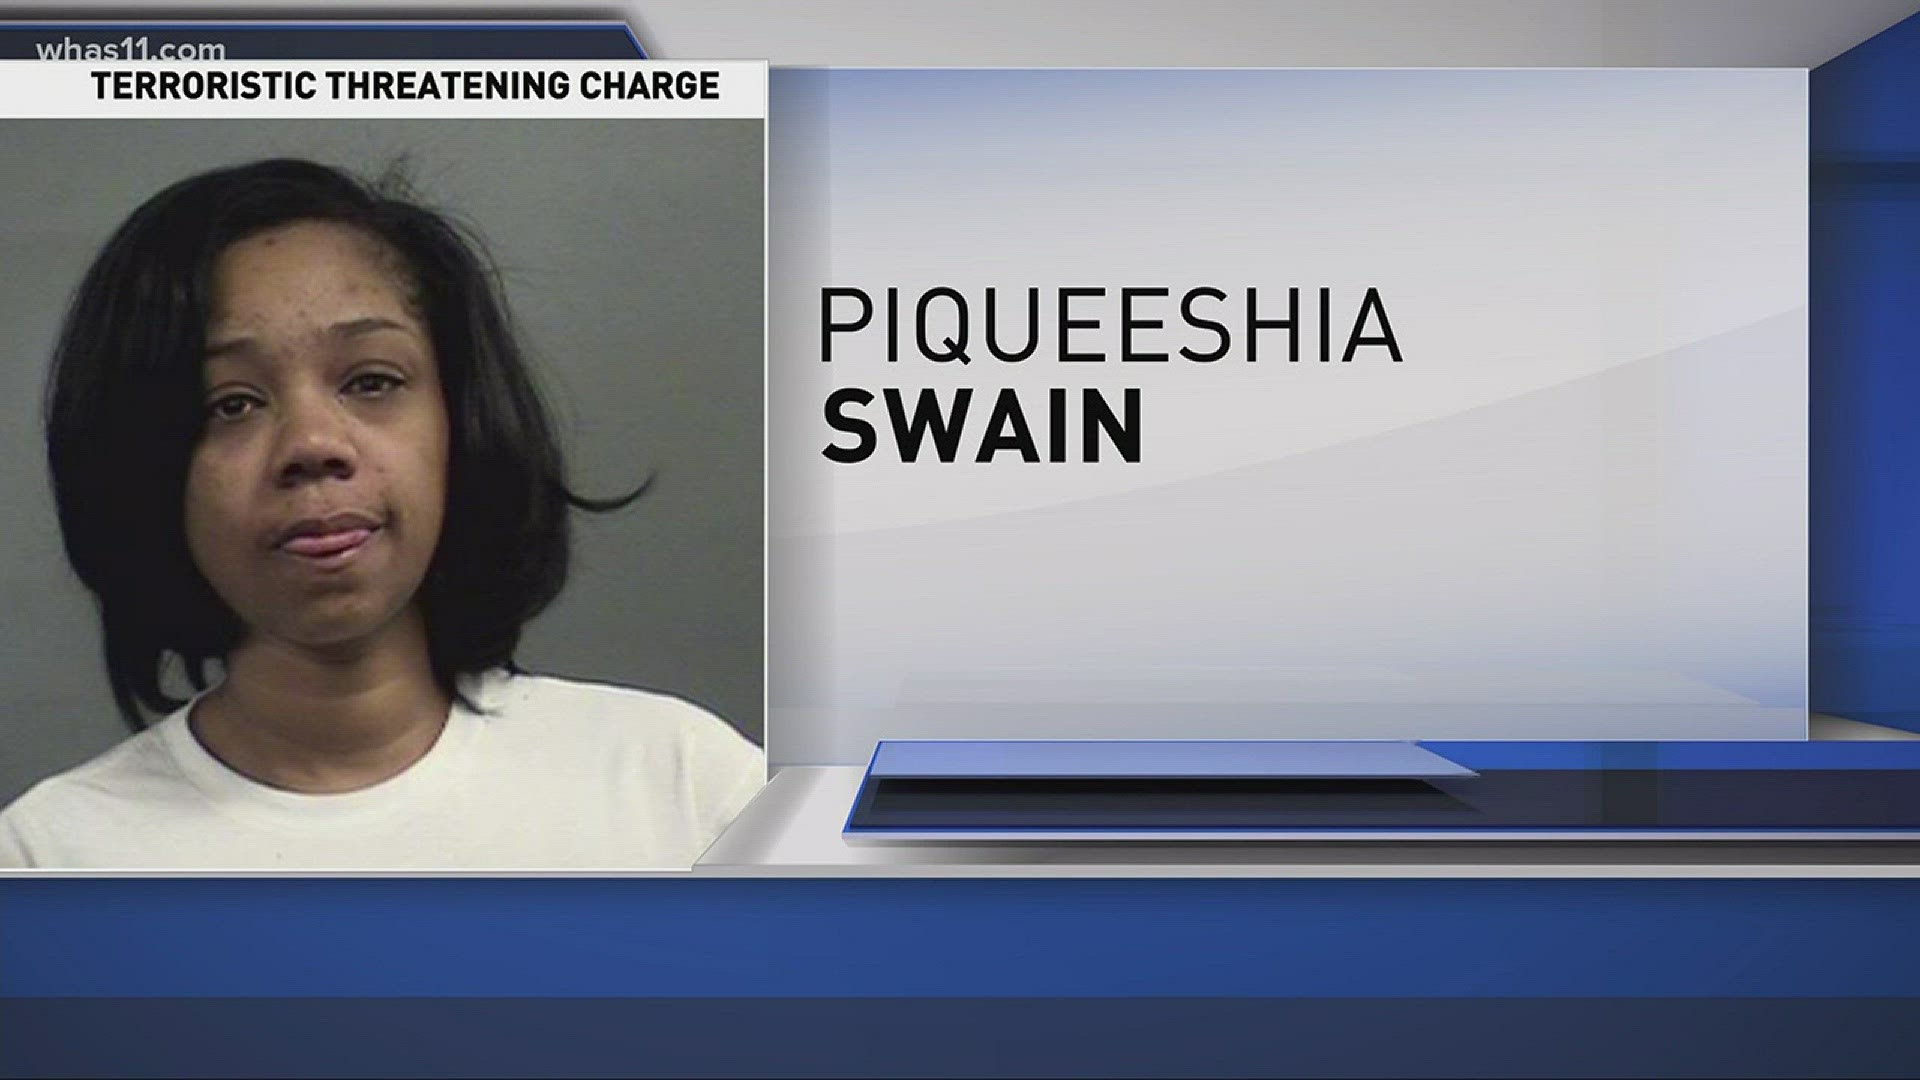 Piqueeshia Swain accused of threatening to blow up Doss High School is facing a charge of terroristic threatening.